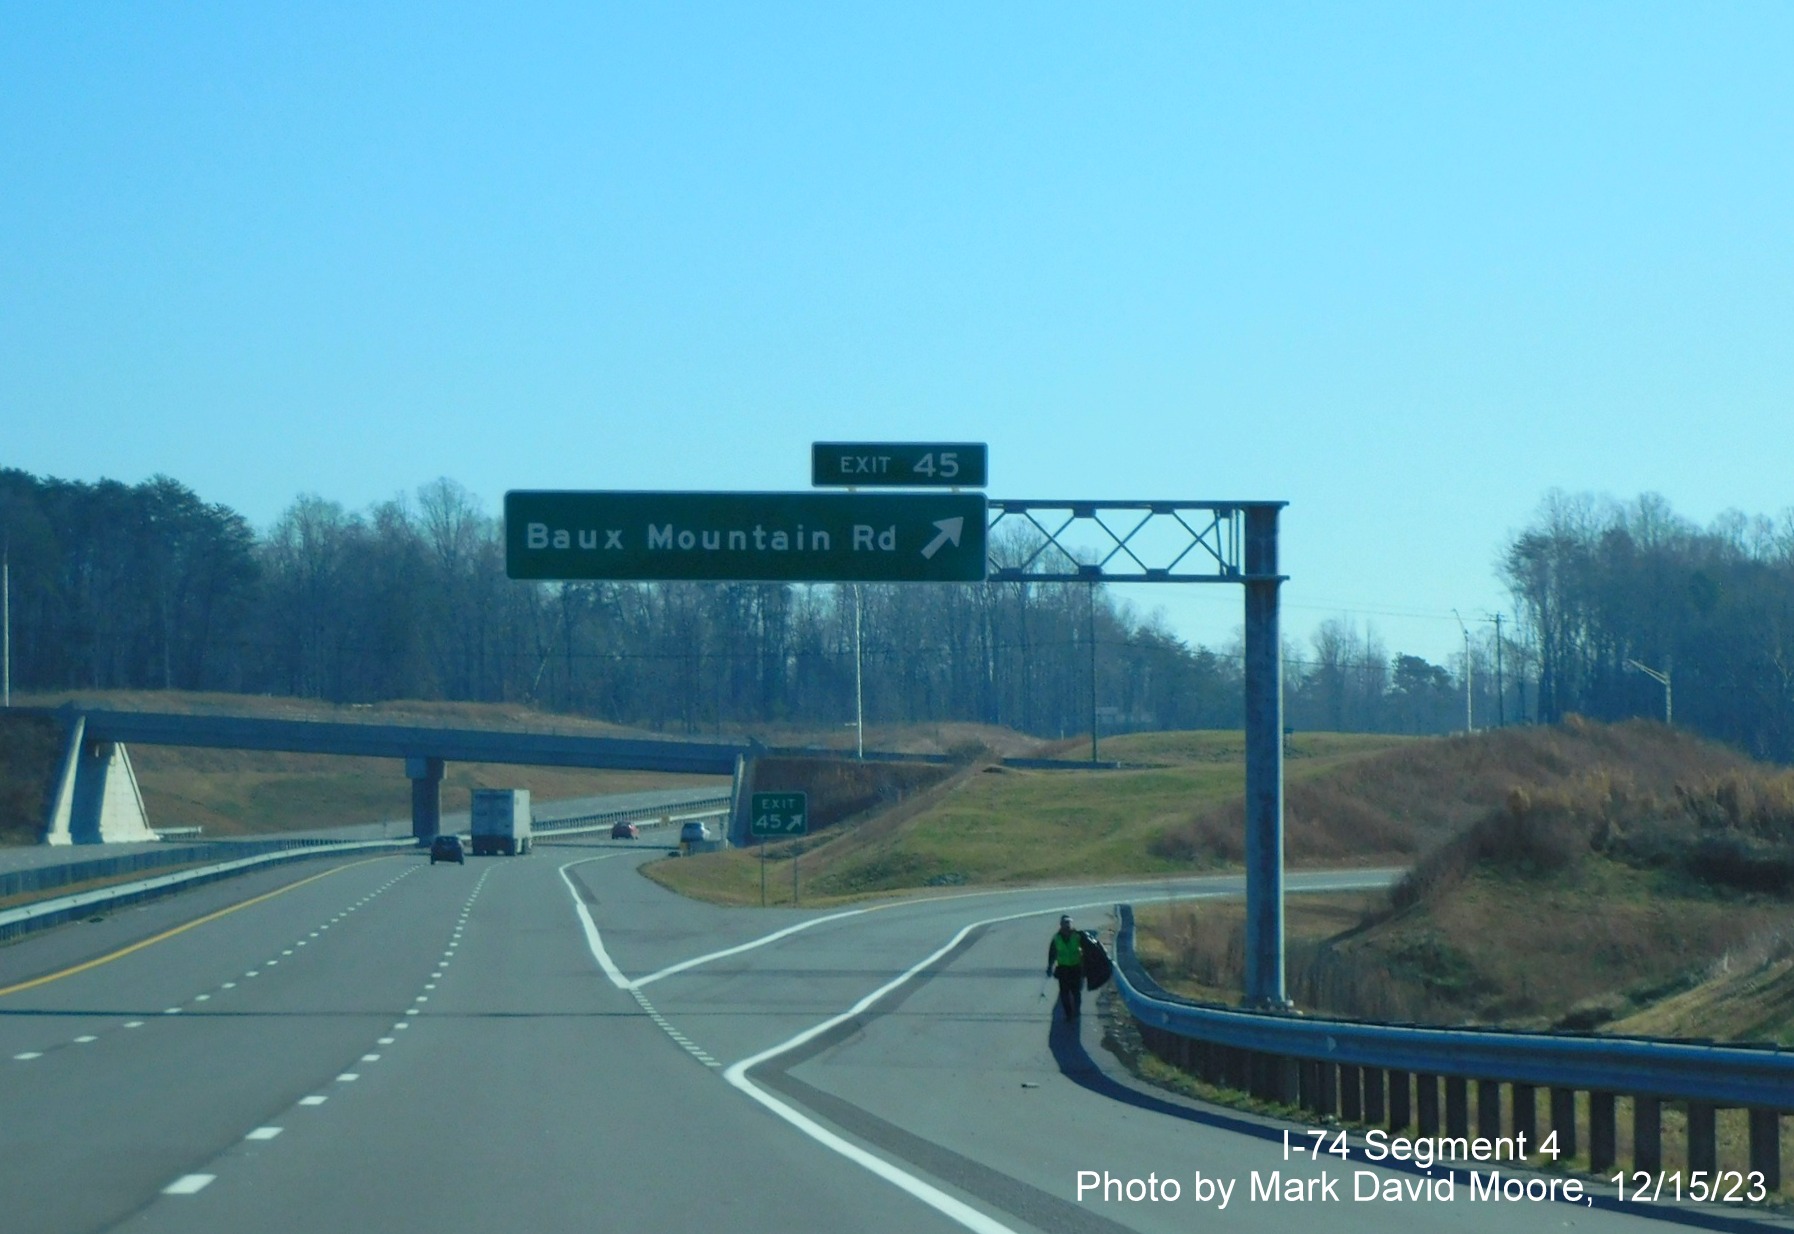 Image of the overhead ramp sign for the Baux Mountain Road exit on NC 74 (Future I-74) East/
        Winston-Salem Northern Beltway, by Mark David Moore, December 2023